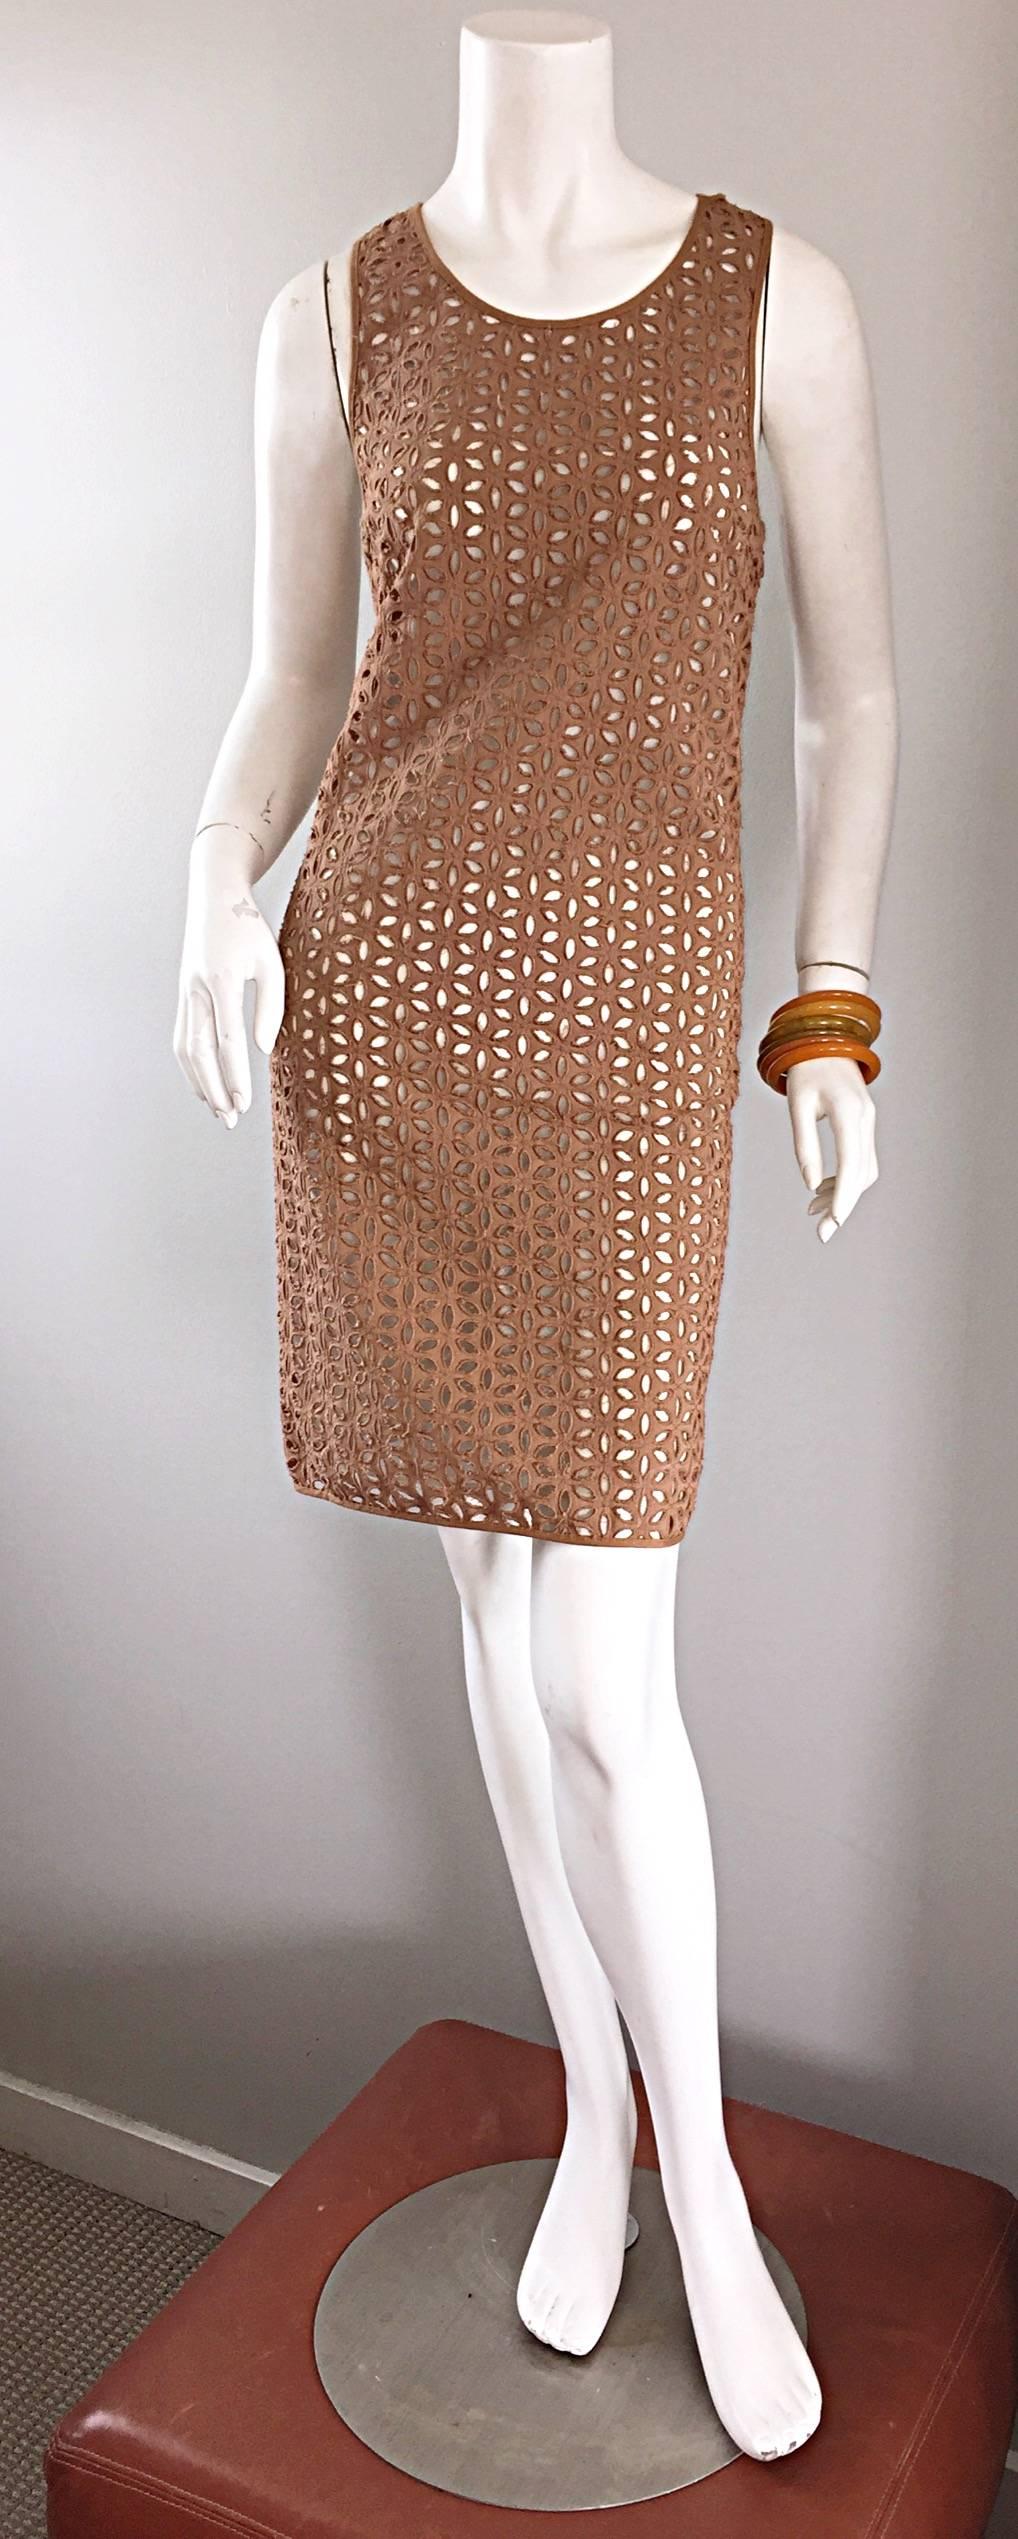 Derek Lam Chic Taupe Light Brown Crochet Cut - Out Dress and Slip For ...